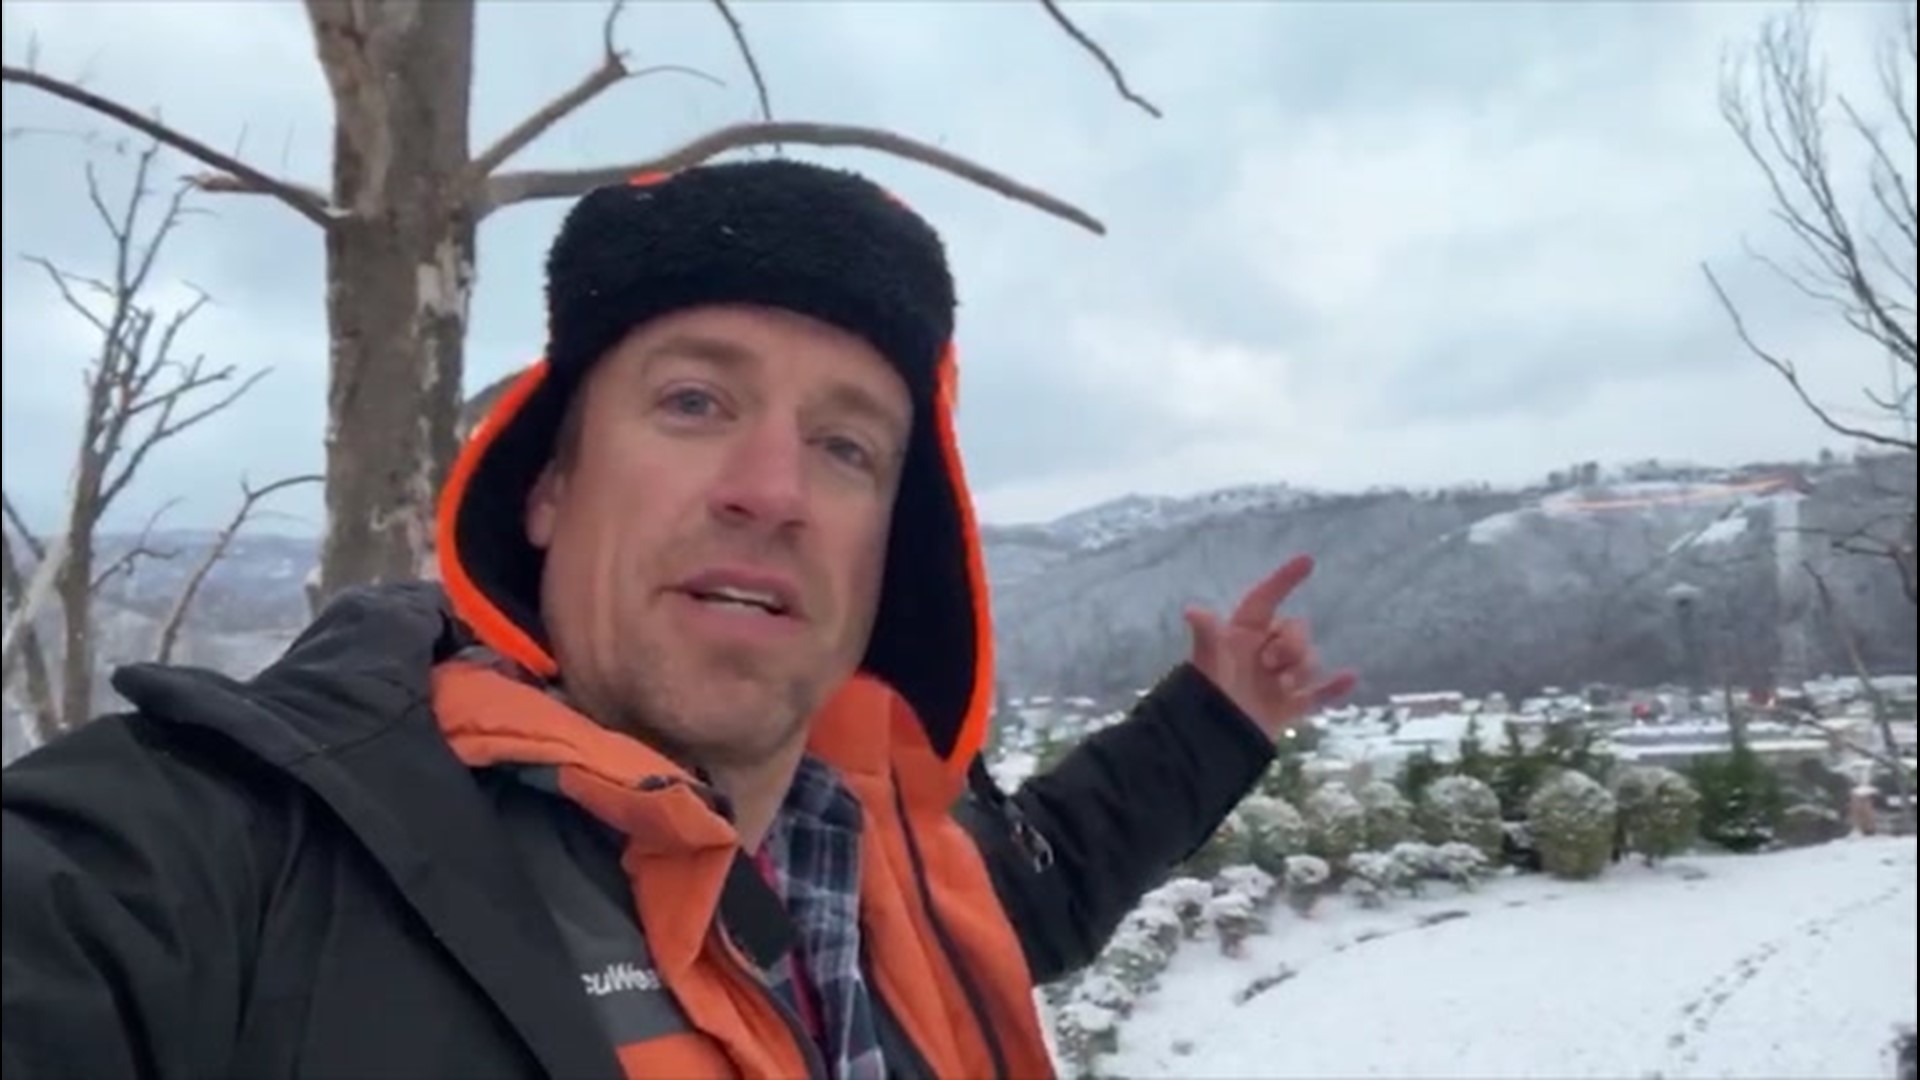 Extreme Meteorologist Reed Timmer was in Gatlinburg, Tennessee, on Dec. 1, after the area was blanketed in several inches of snow.